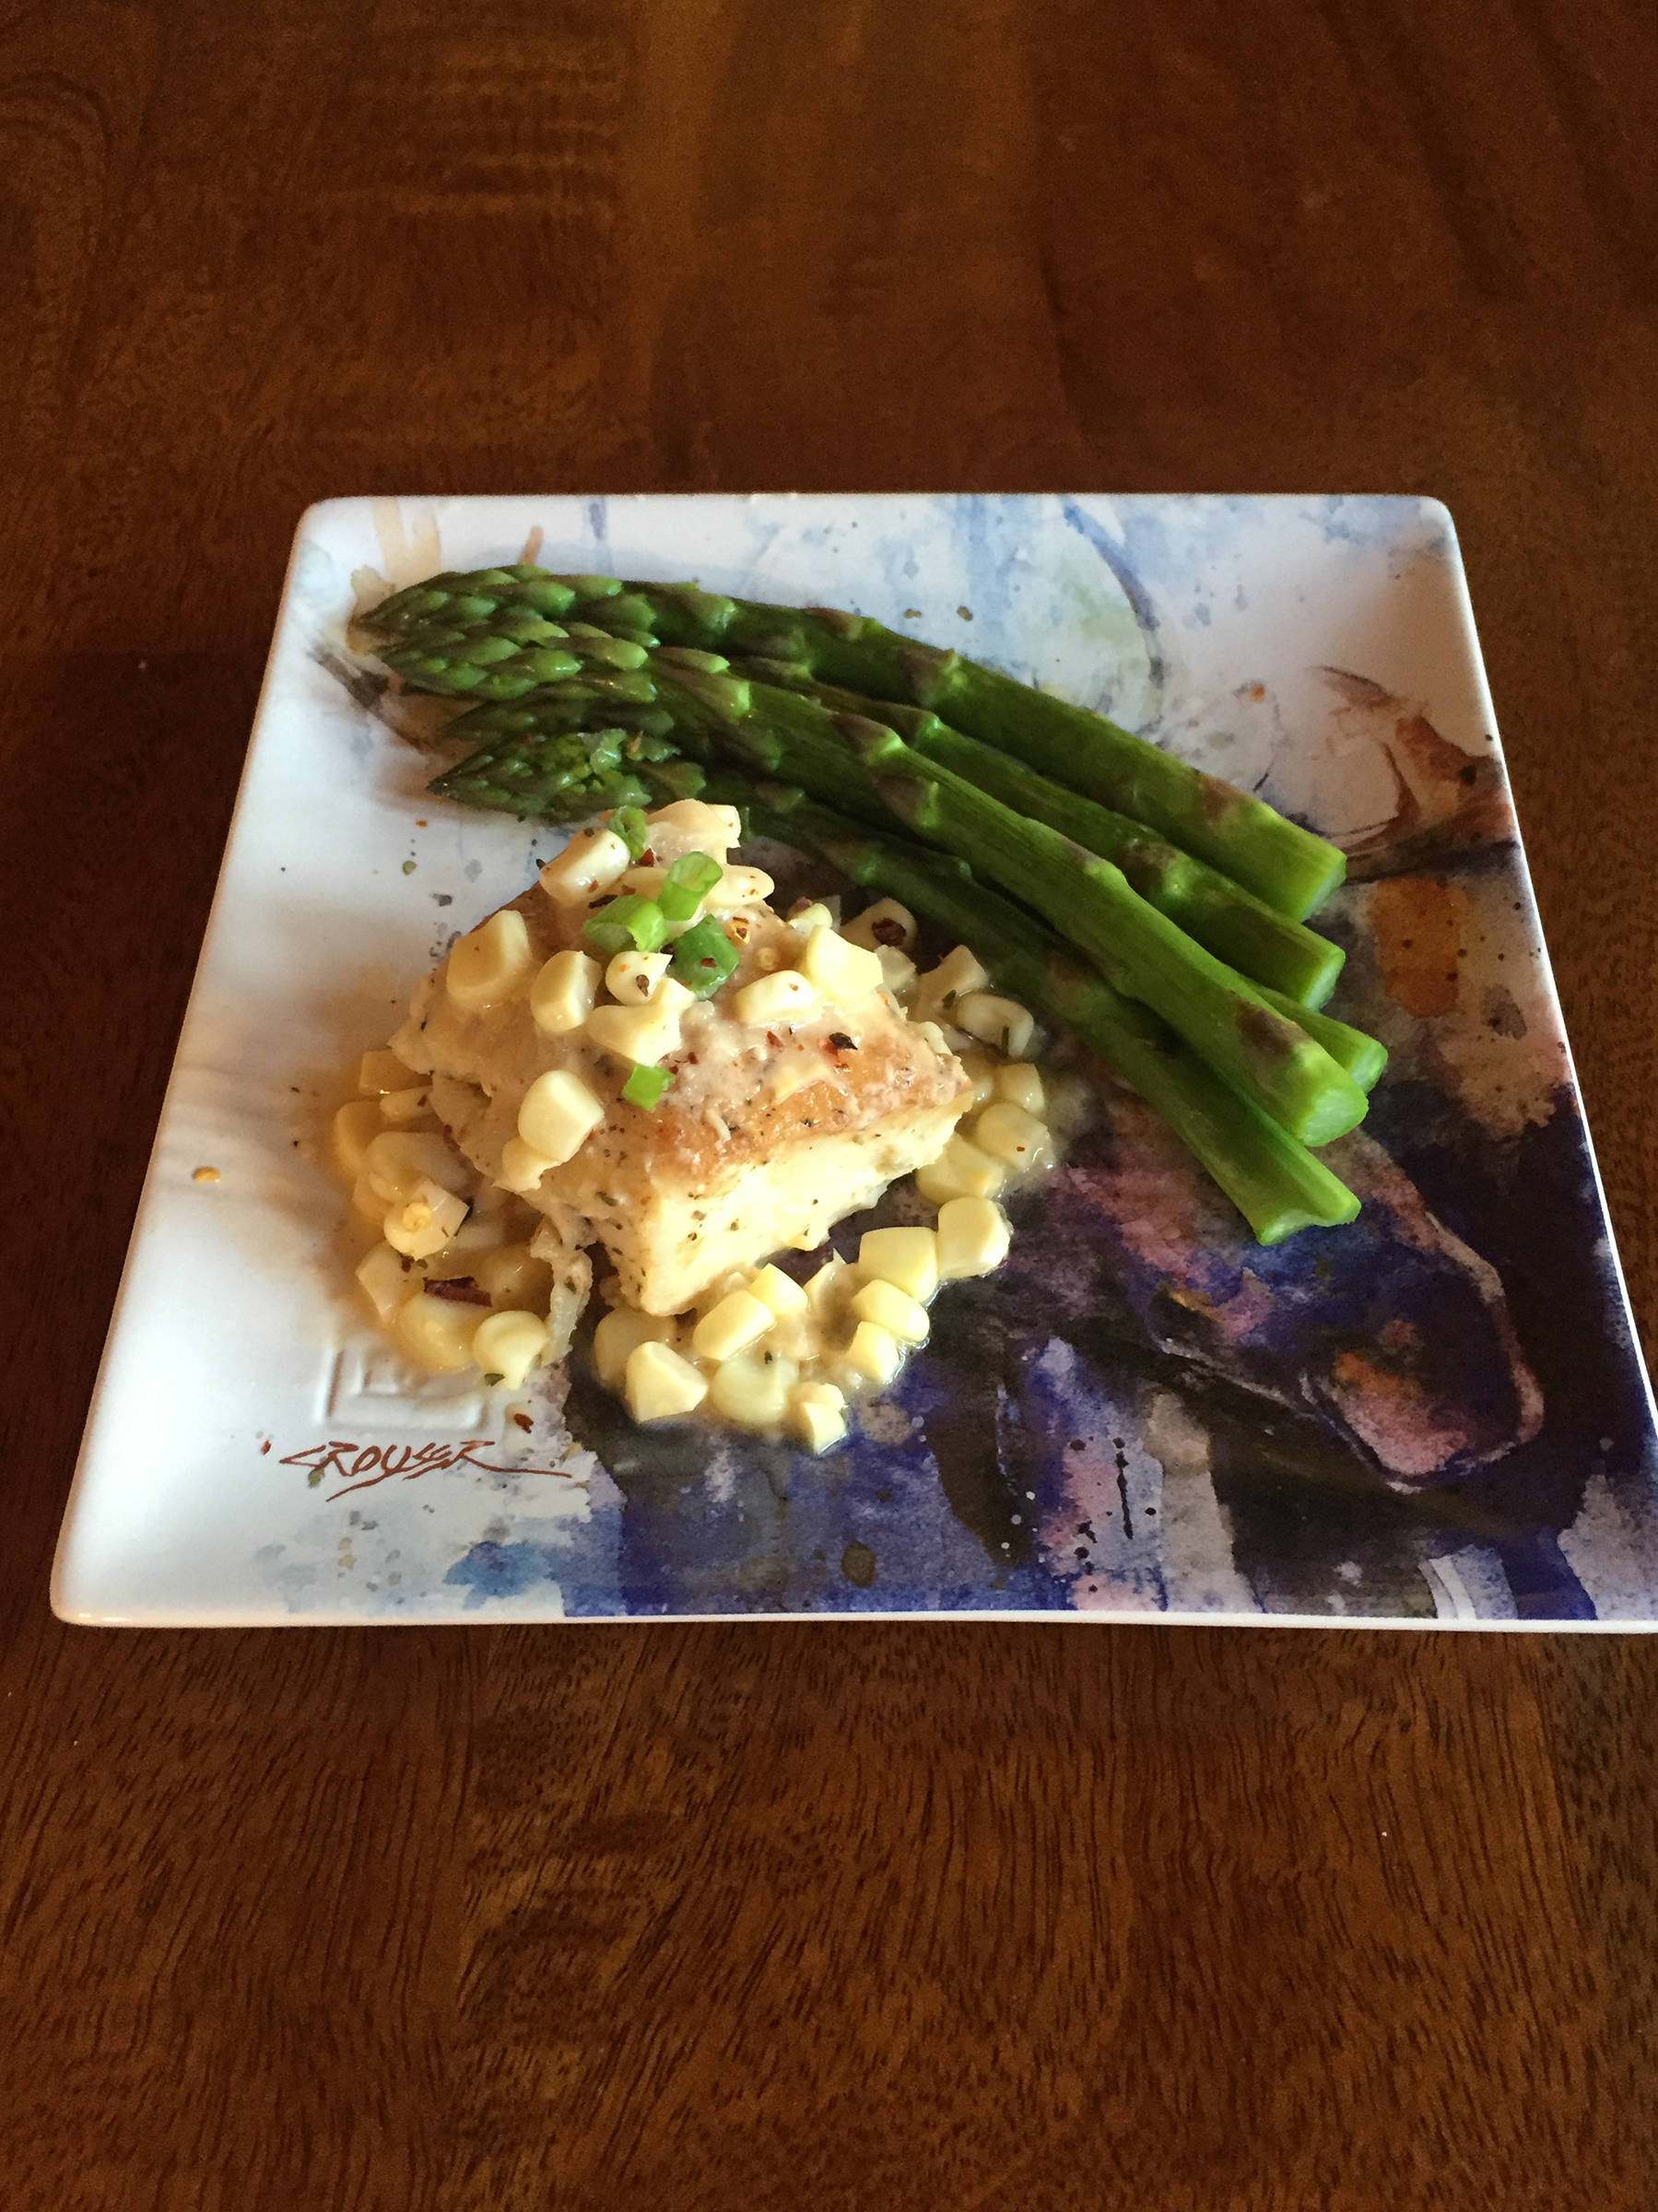 Corn in this recipe of roasted halibut with corn chardonnay butter sauce complements the taste of halibut, as prepared here on June 25, 2019, in Teri Robl’s kitchen in Homer, Alaska. (Photo by Teri Robl)